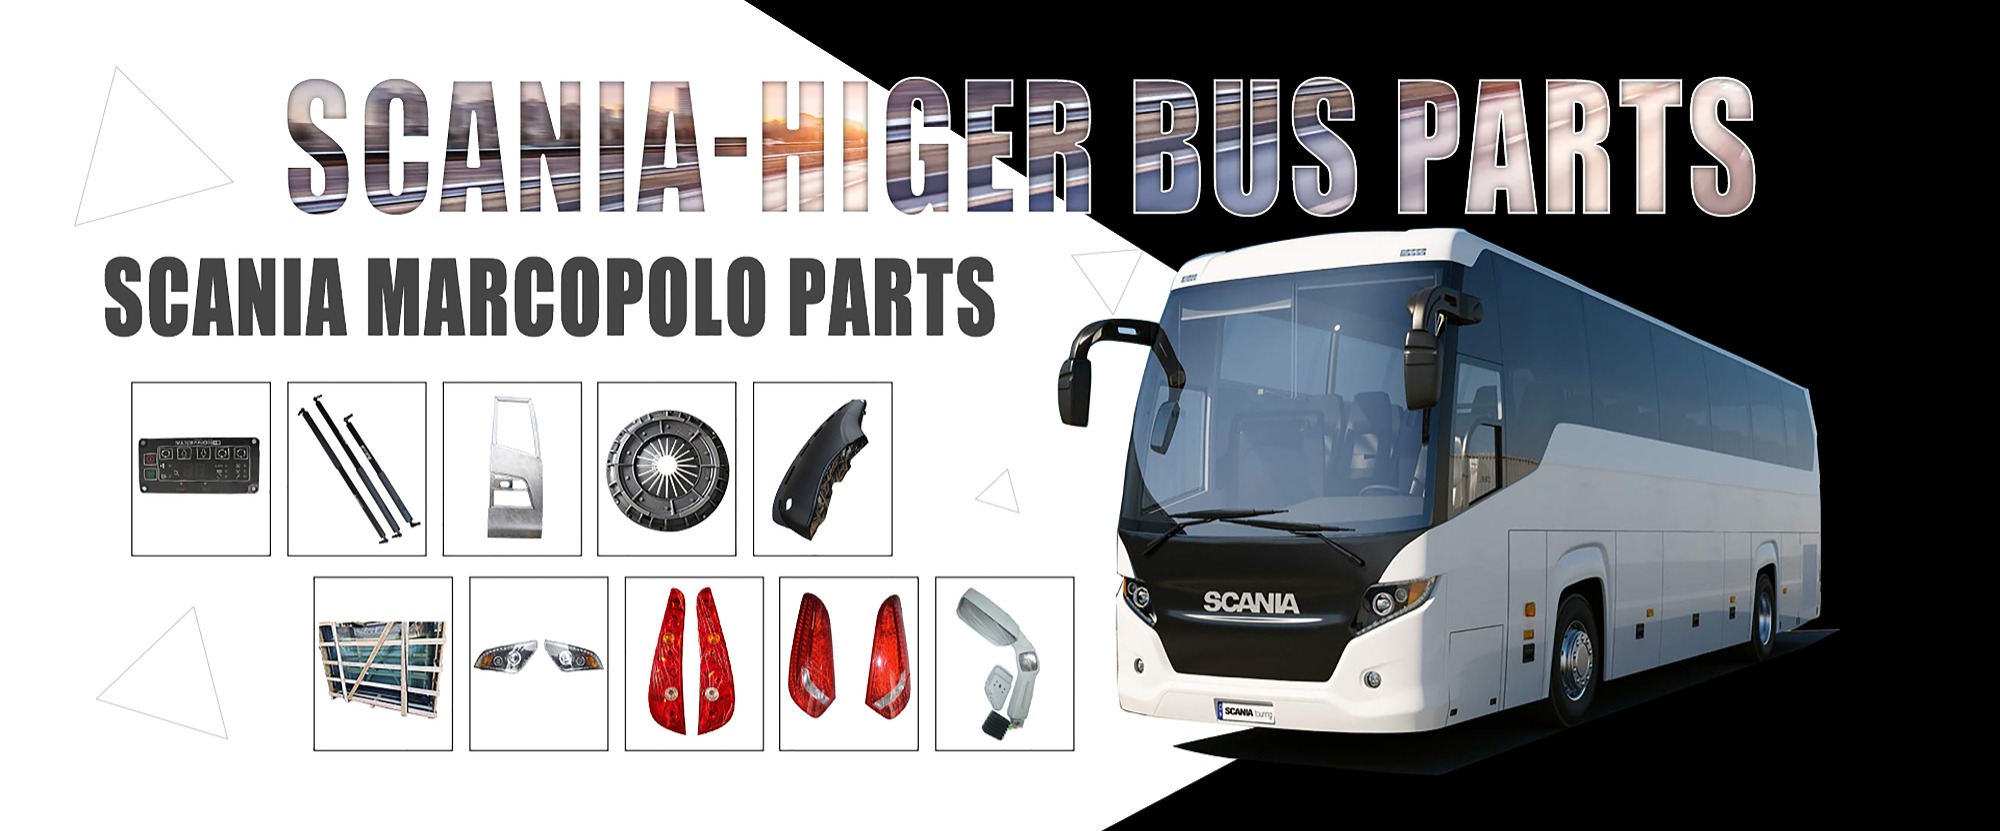 SCANIA HIGER, SCANIA MARCOPOLO BUS PARTS